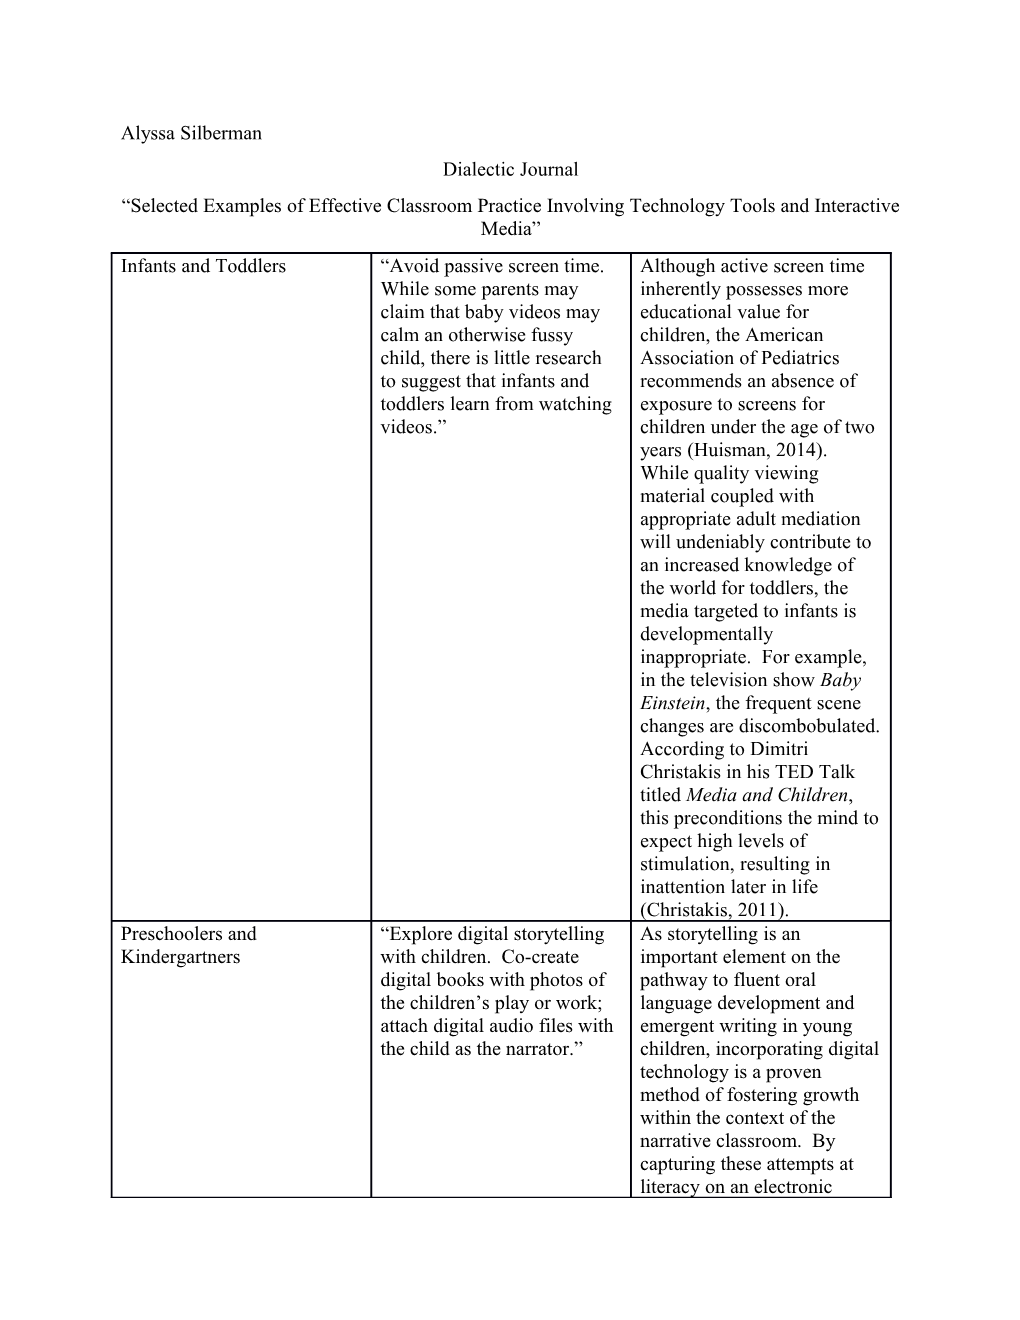 Selected Examples of Effective Classroom Practice Involving Technology Tools and Interactive